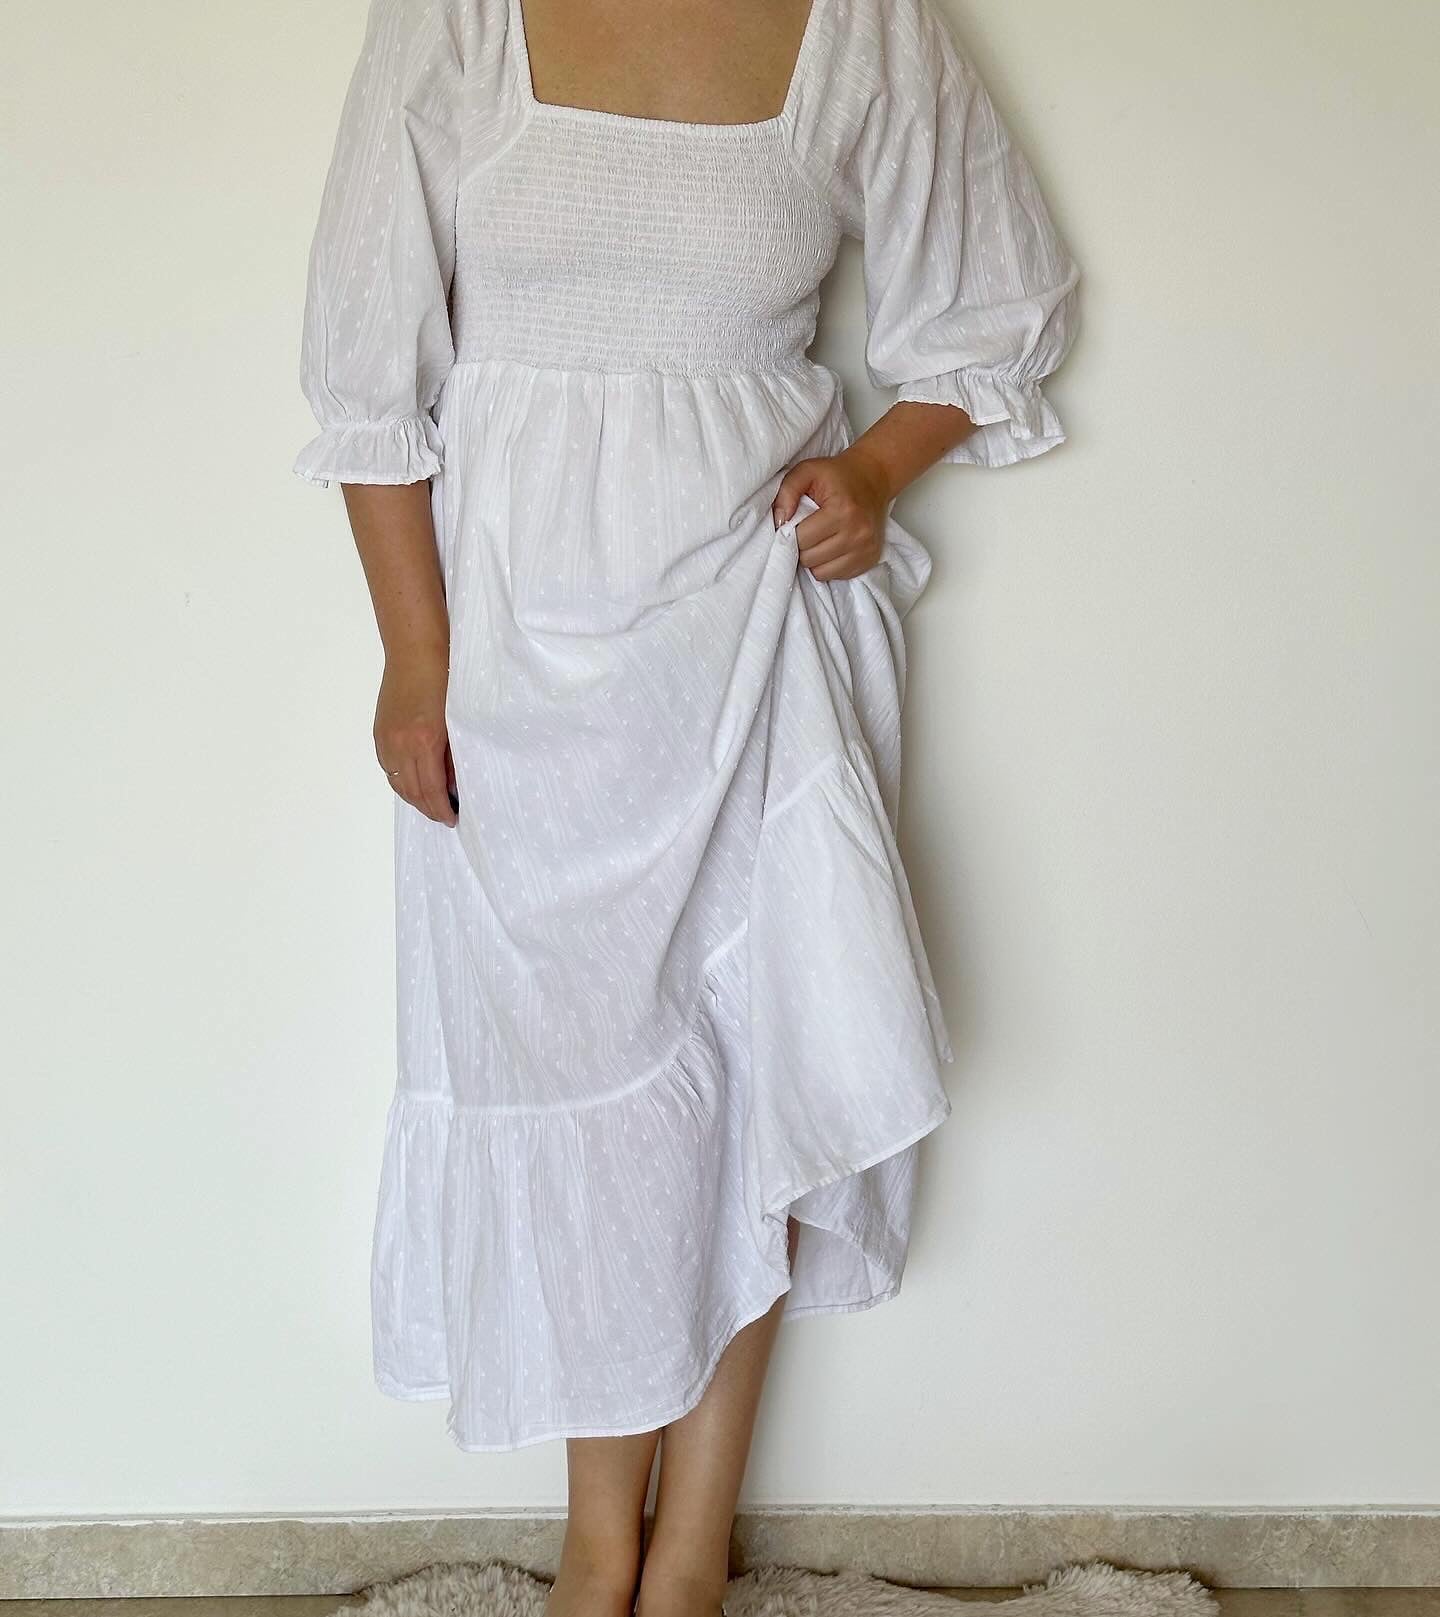 Incredible white cotton dress with puff sleeves